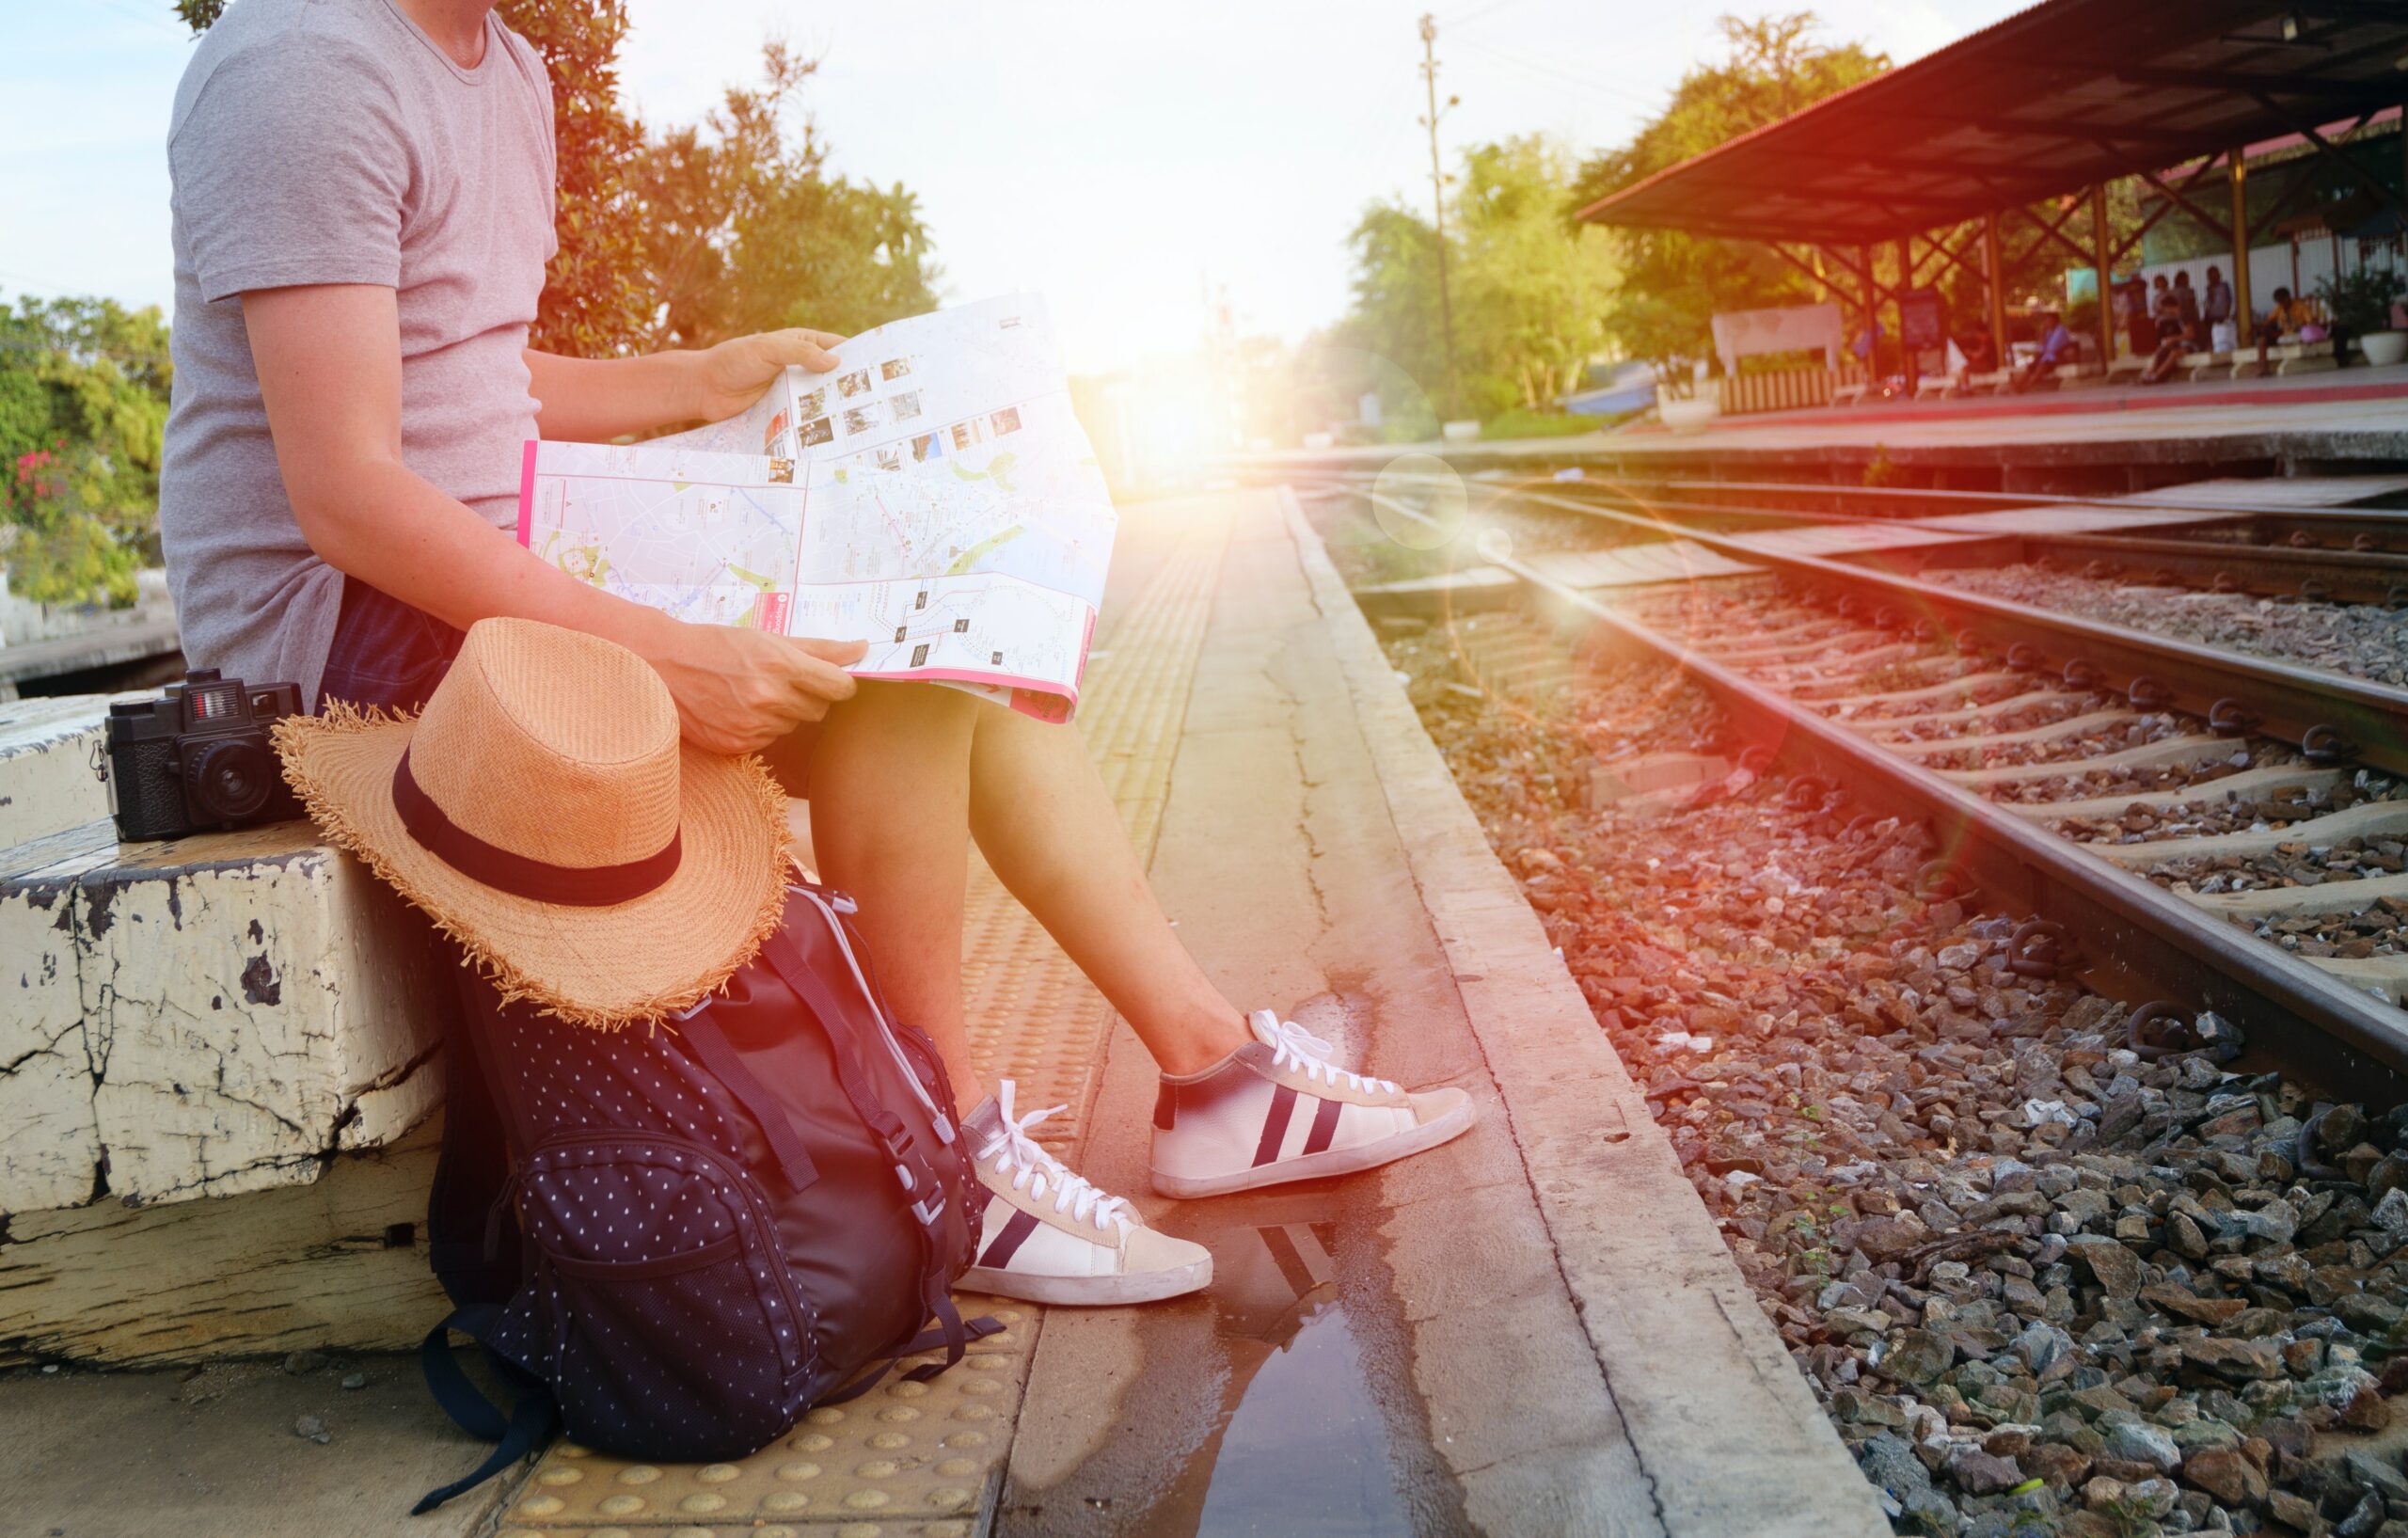 Image of a tourist at a train station, carrying a small backpack, and a looking at a map.